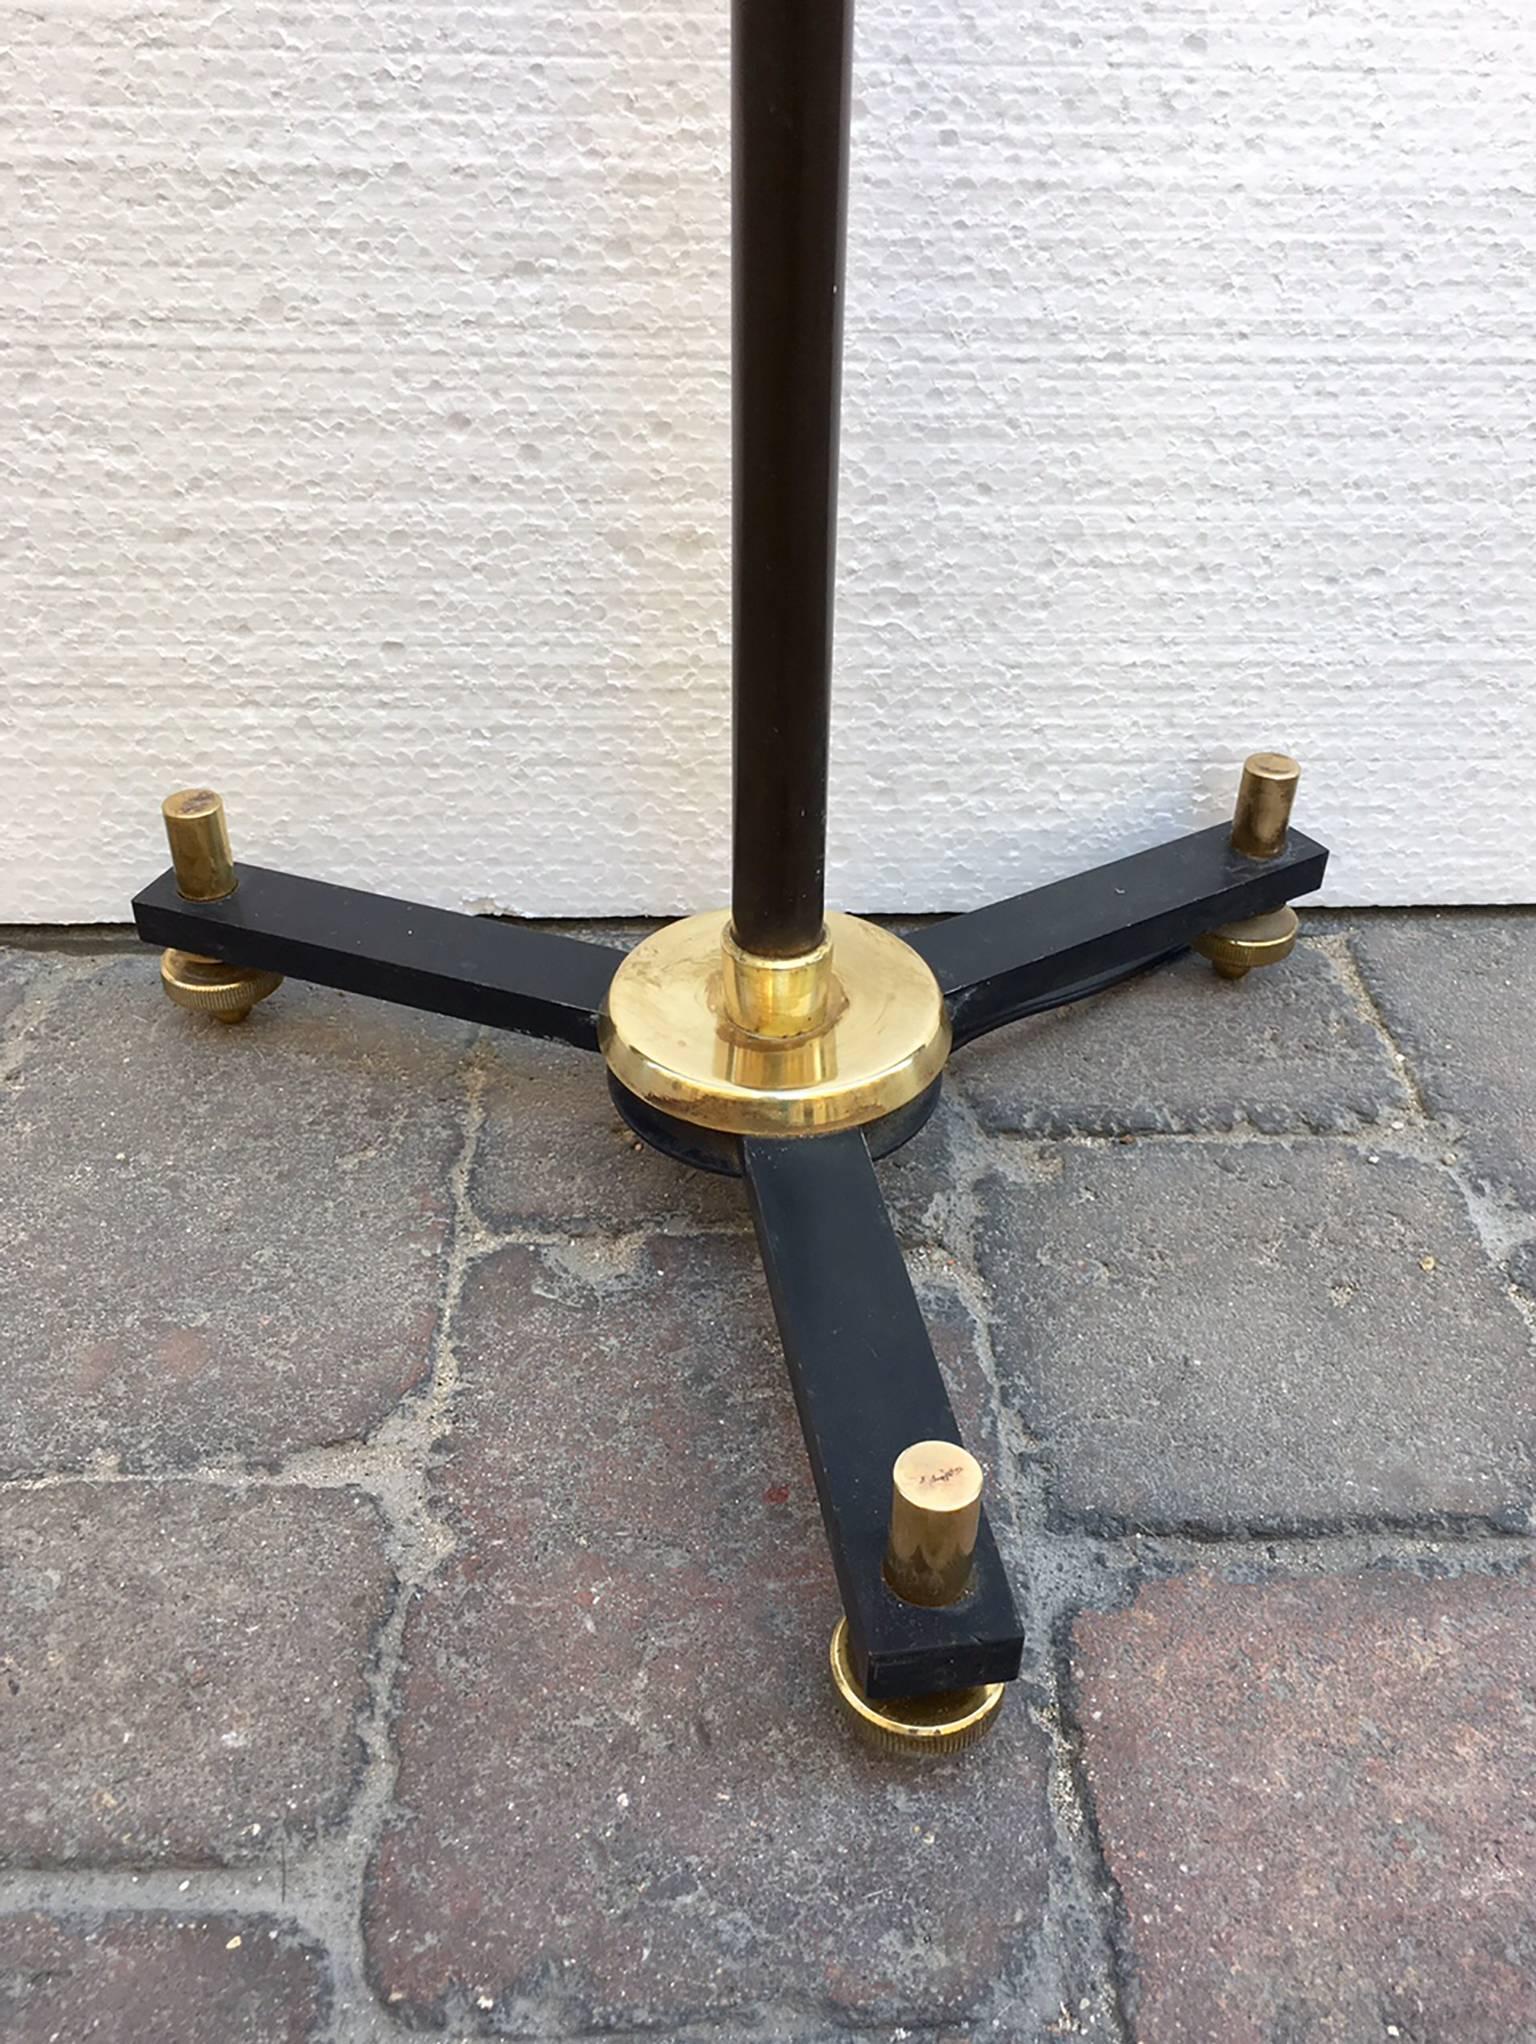 Pair of Spanish floor lamps.brass and black lacquered metal, lampshades in black patent leather and interior in gold.